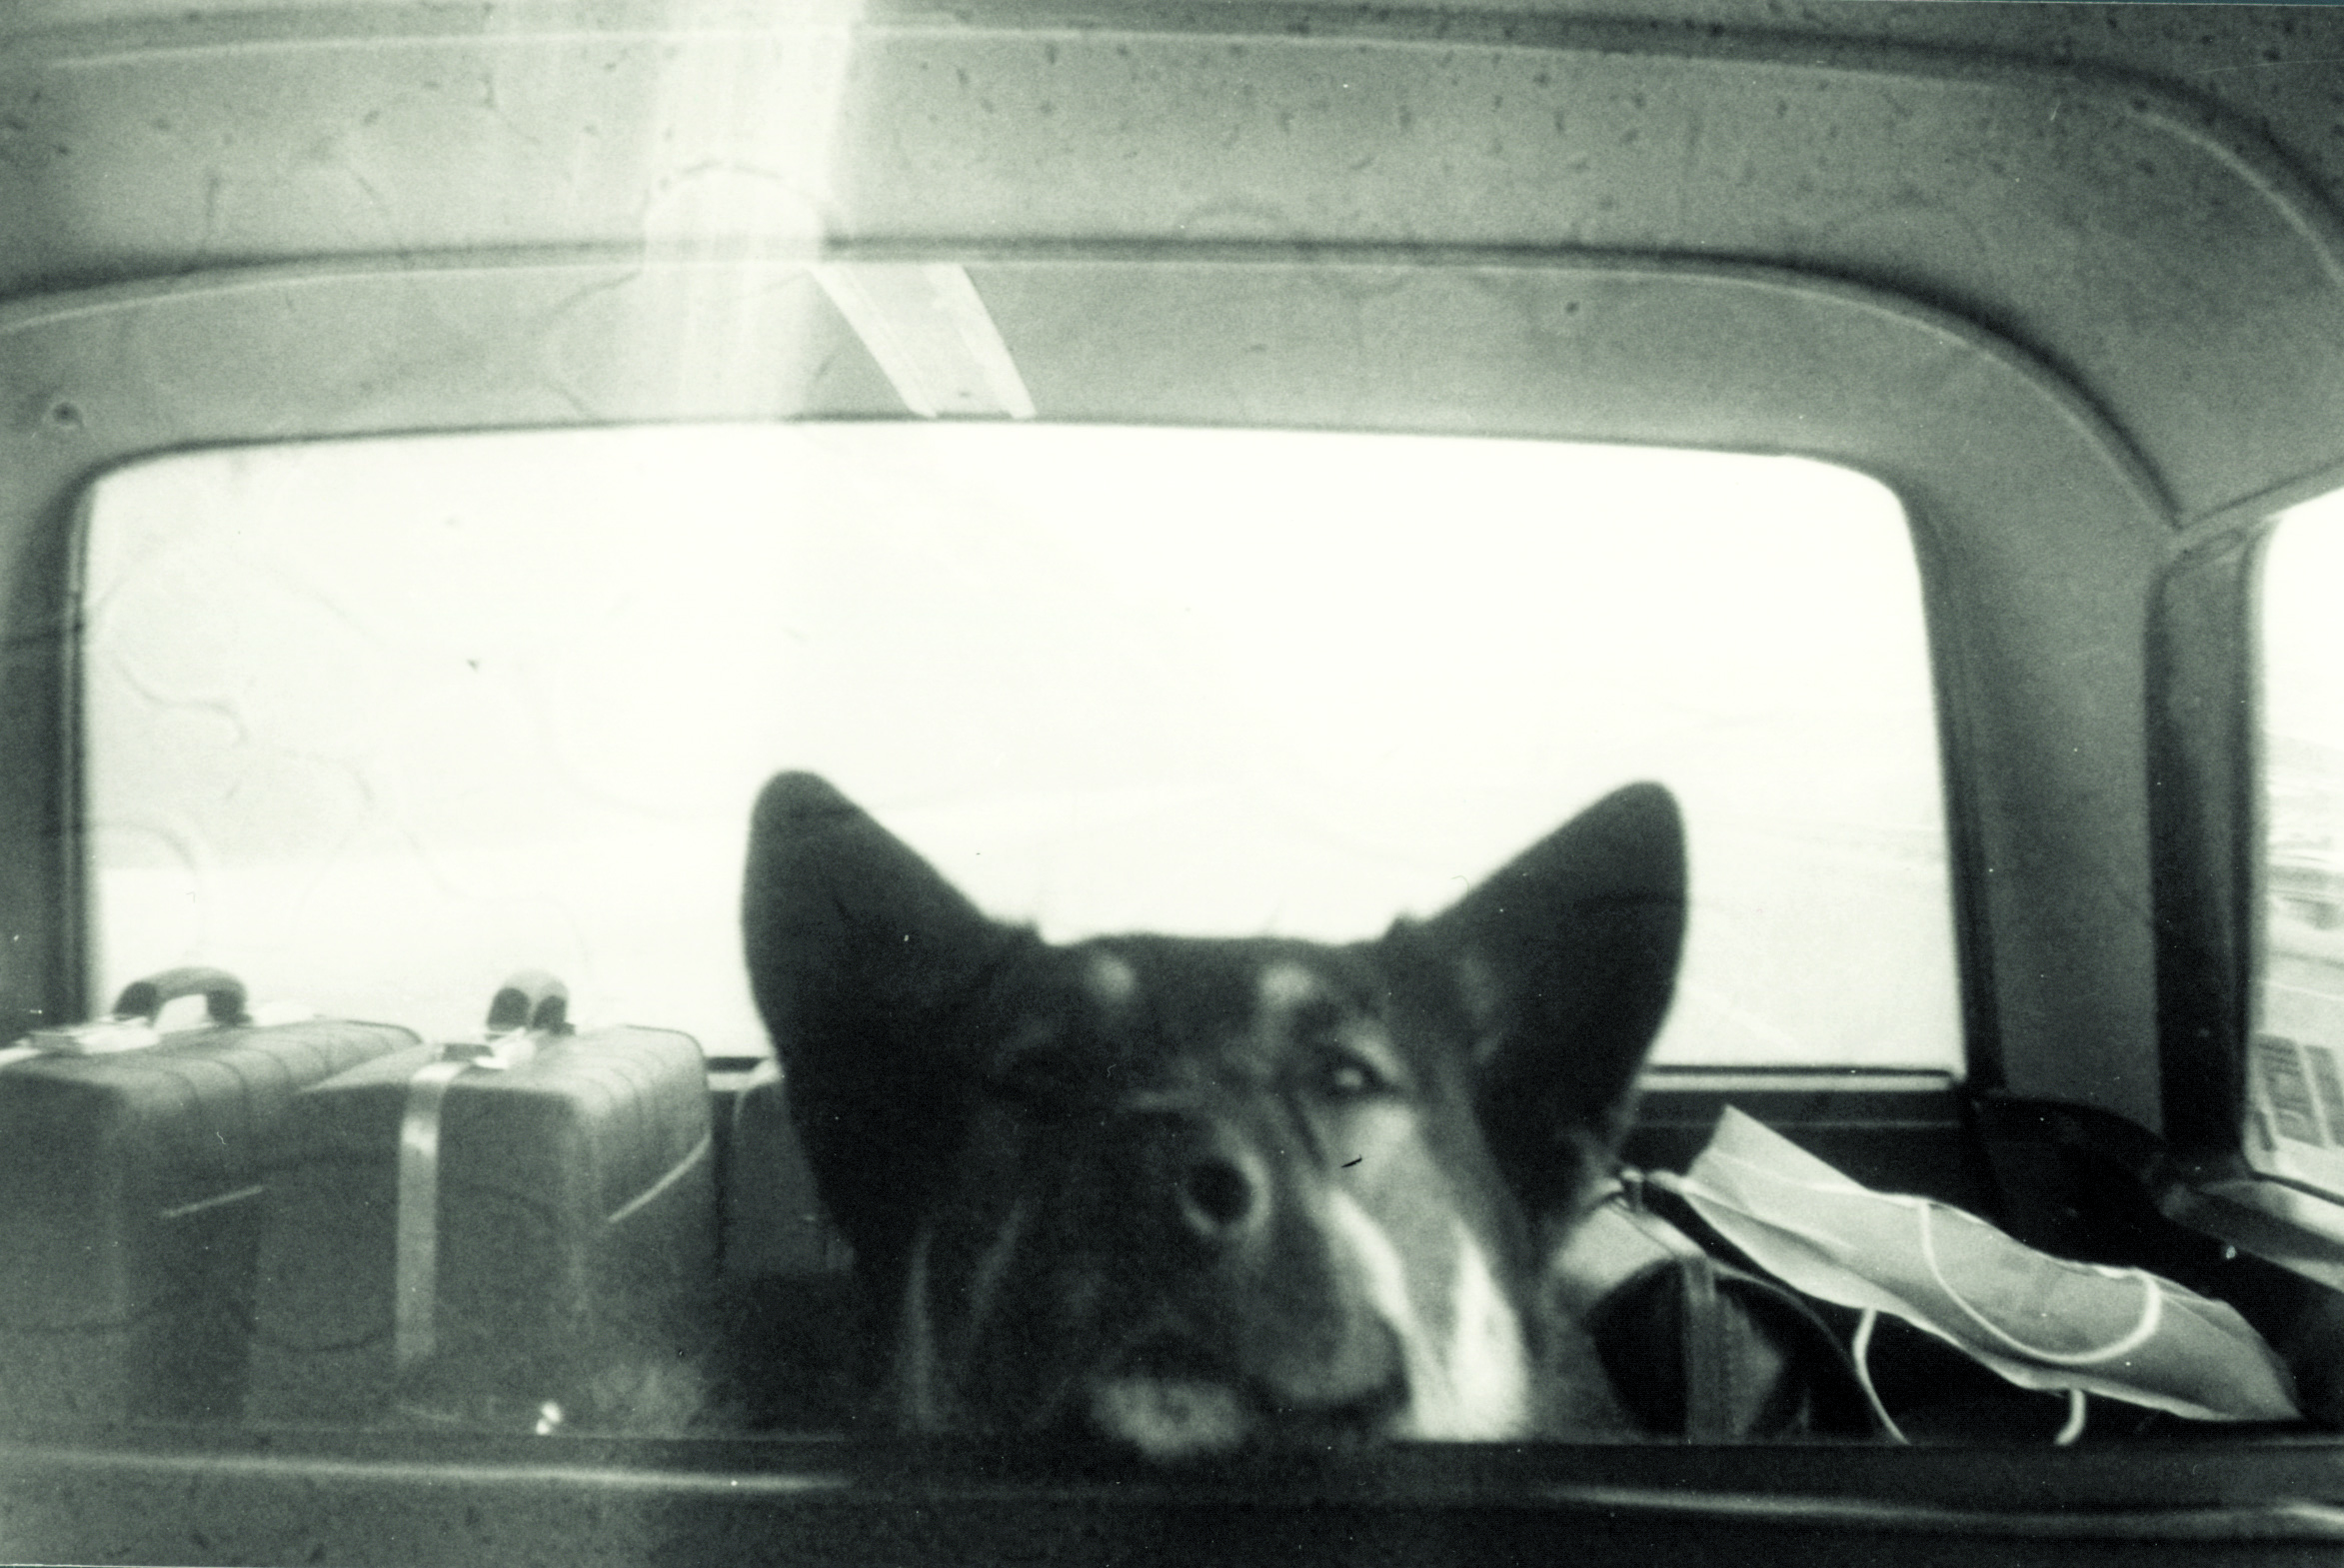 Photograph of a German Shepherd Husky mix dog, Sparky,
in the back of a car with two luggage bags.  His head is on
the seat of the car, facing the camera.